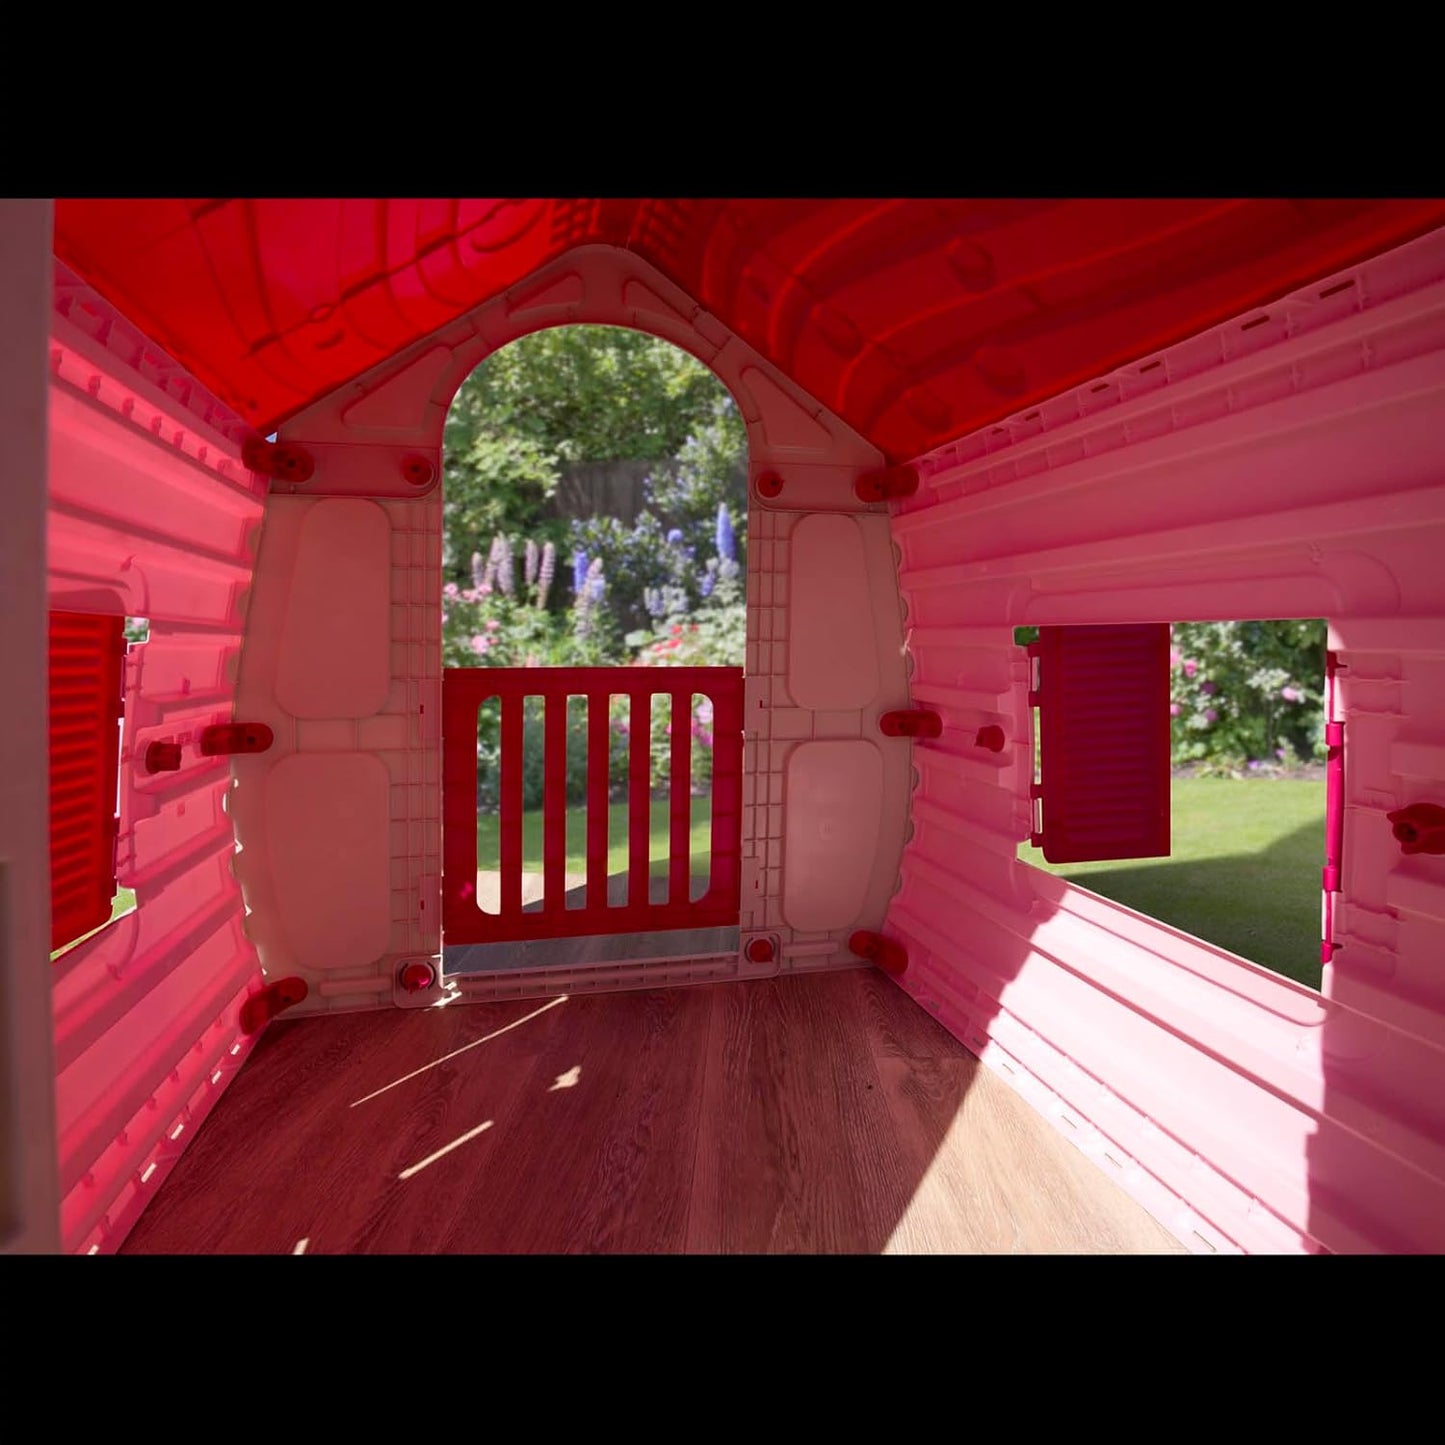 Pink Children's Playhouse / Wendy House - Suitable For In Or Outdoors